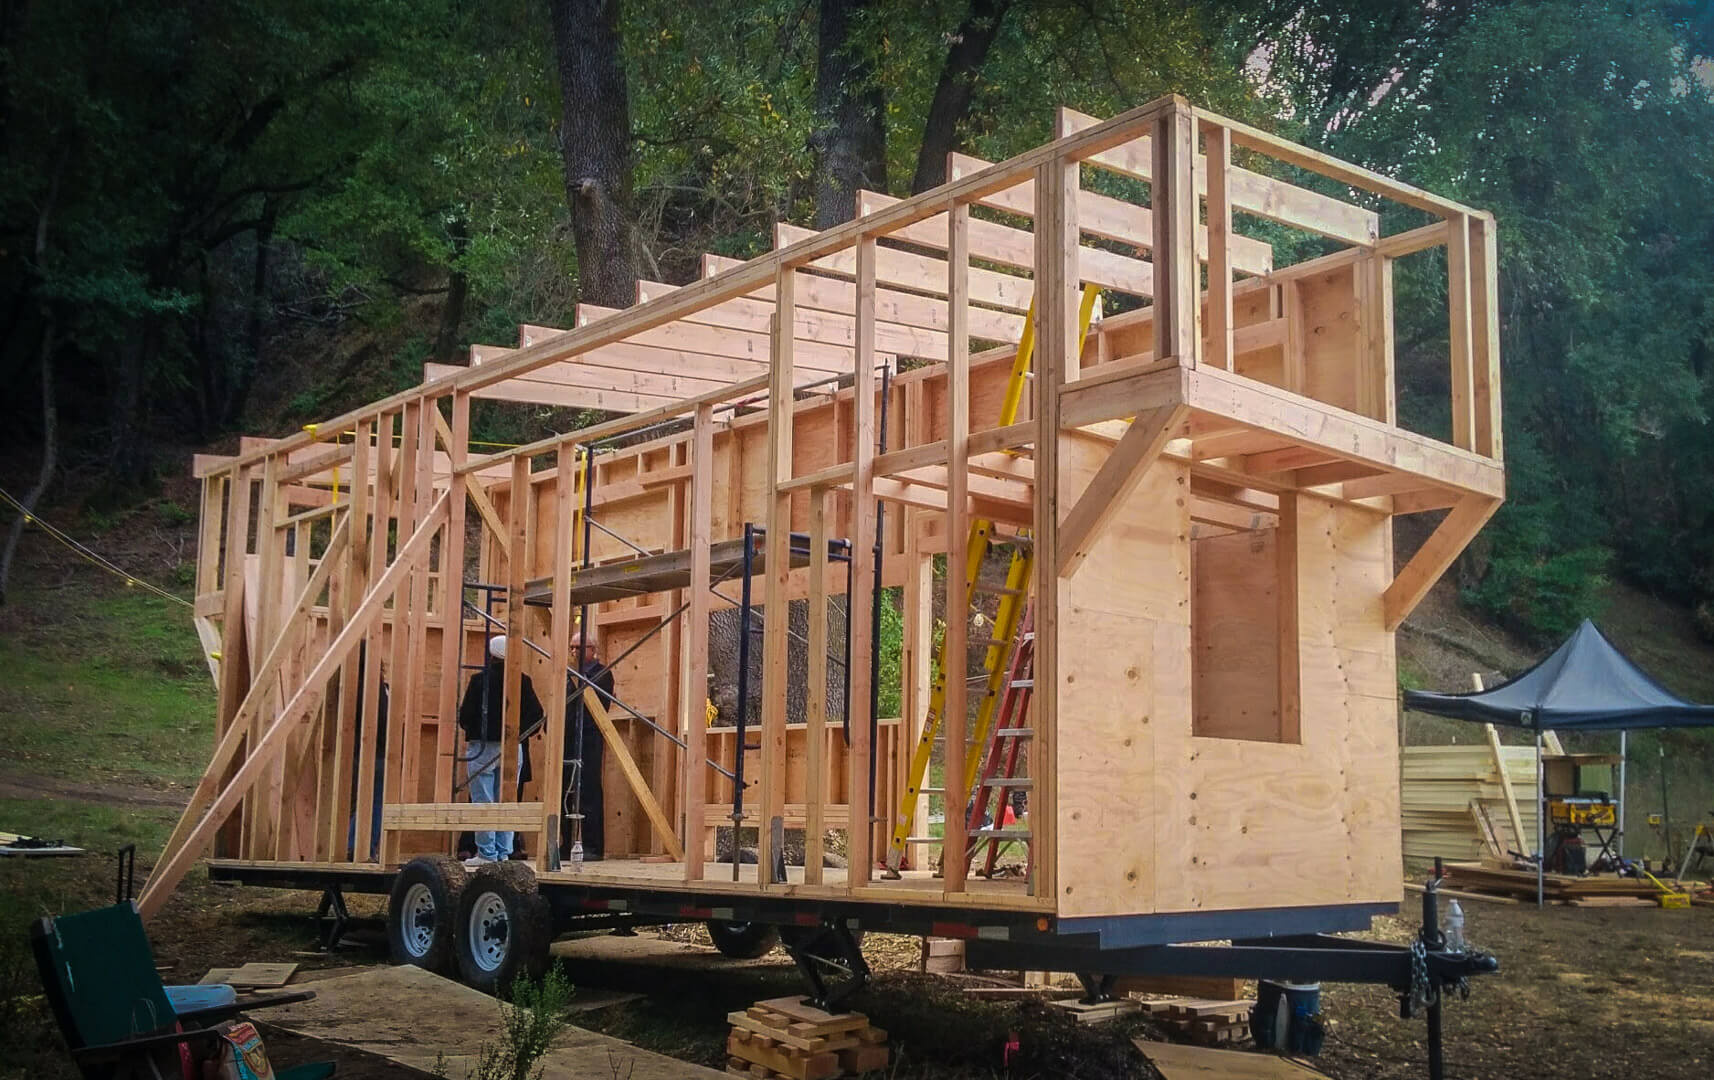 How to Build Your Own Tiny House?